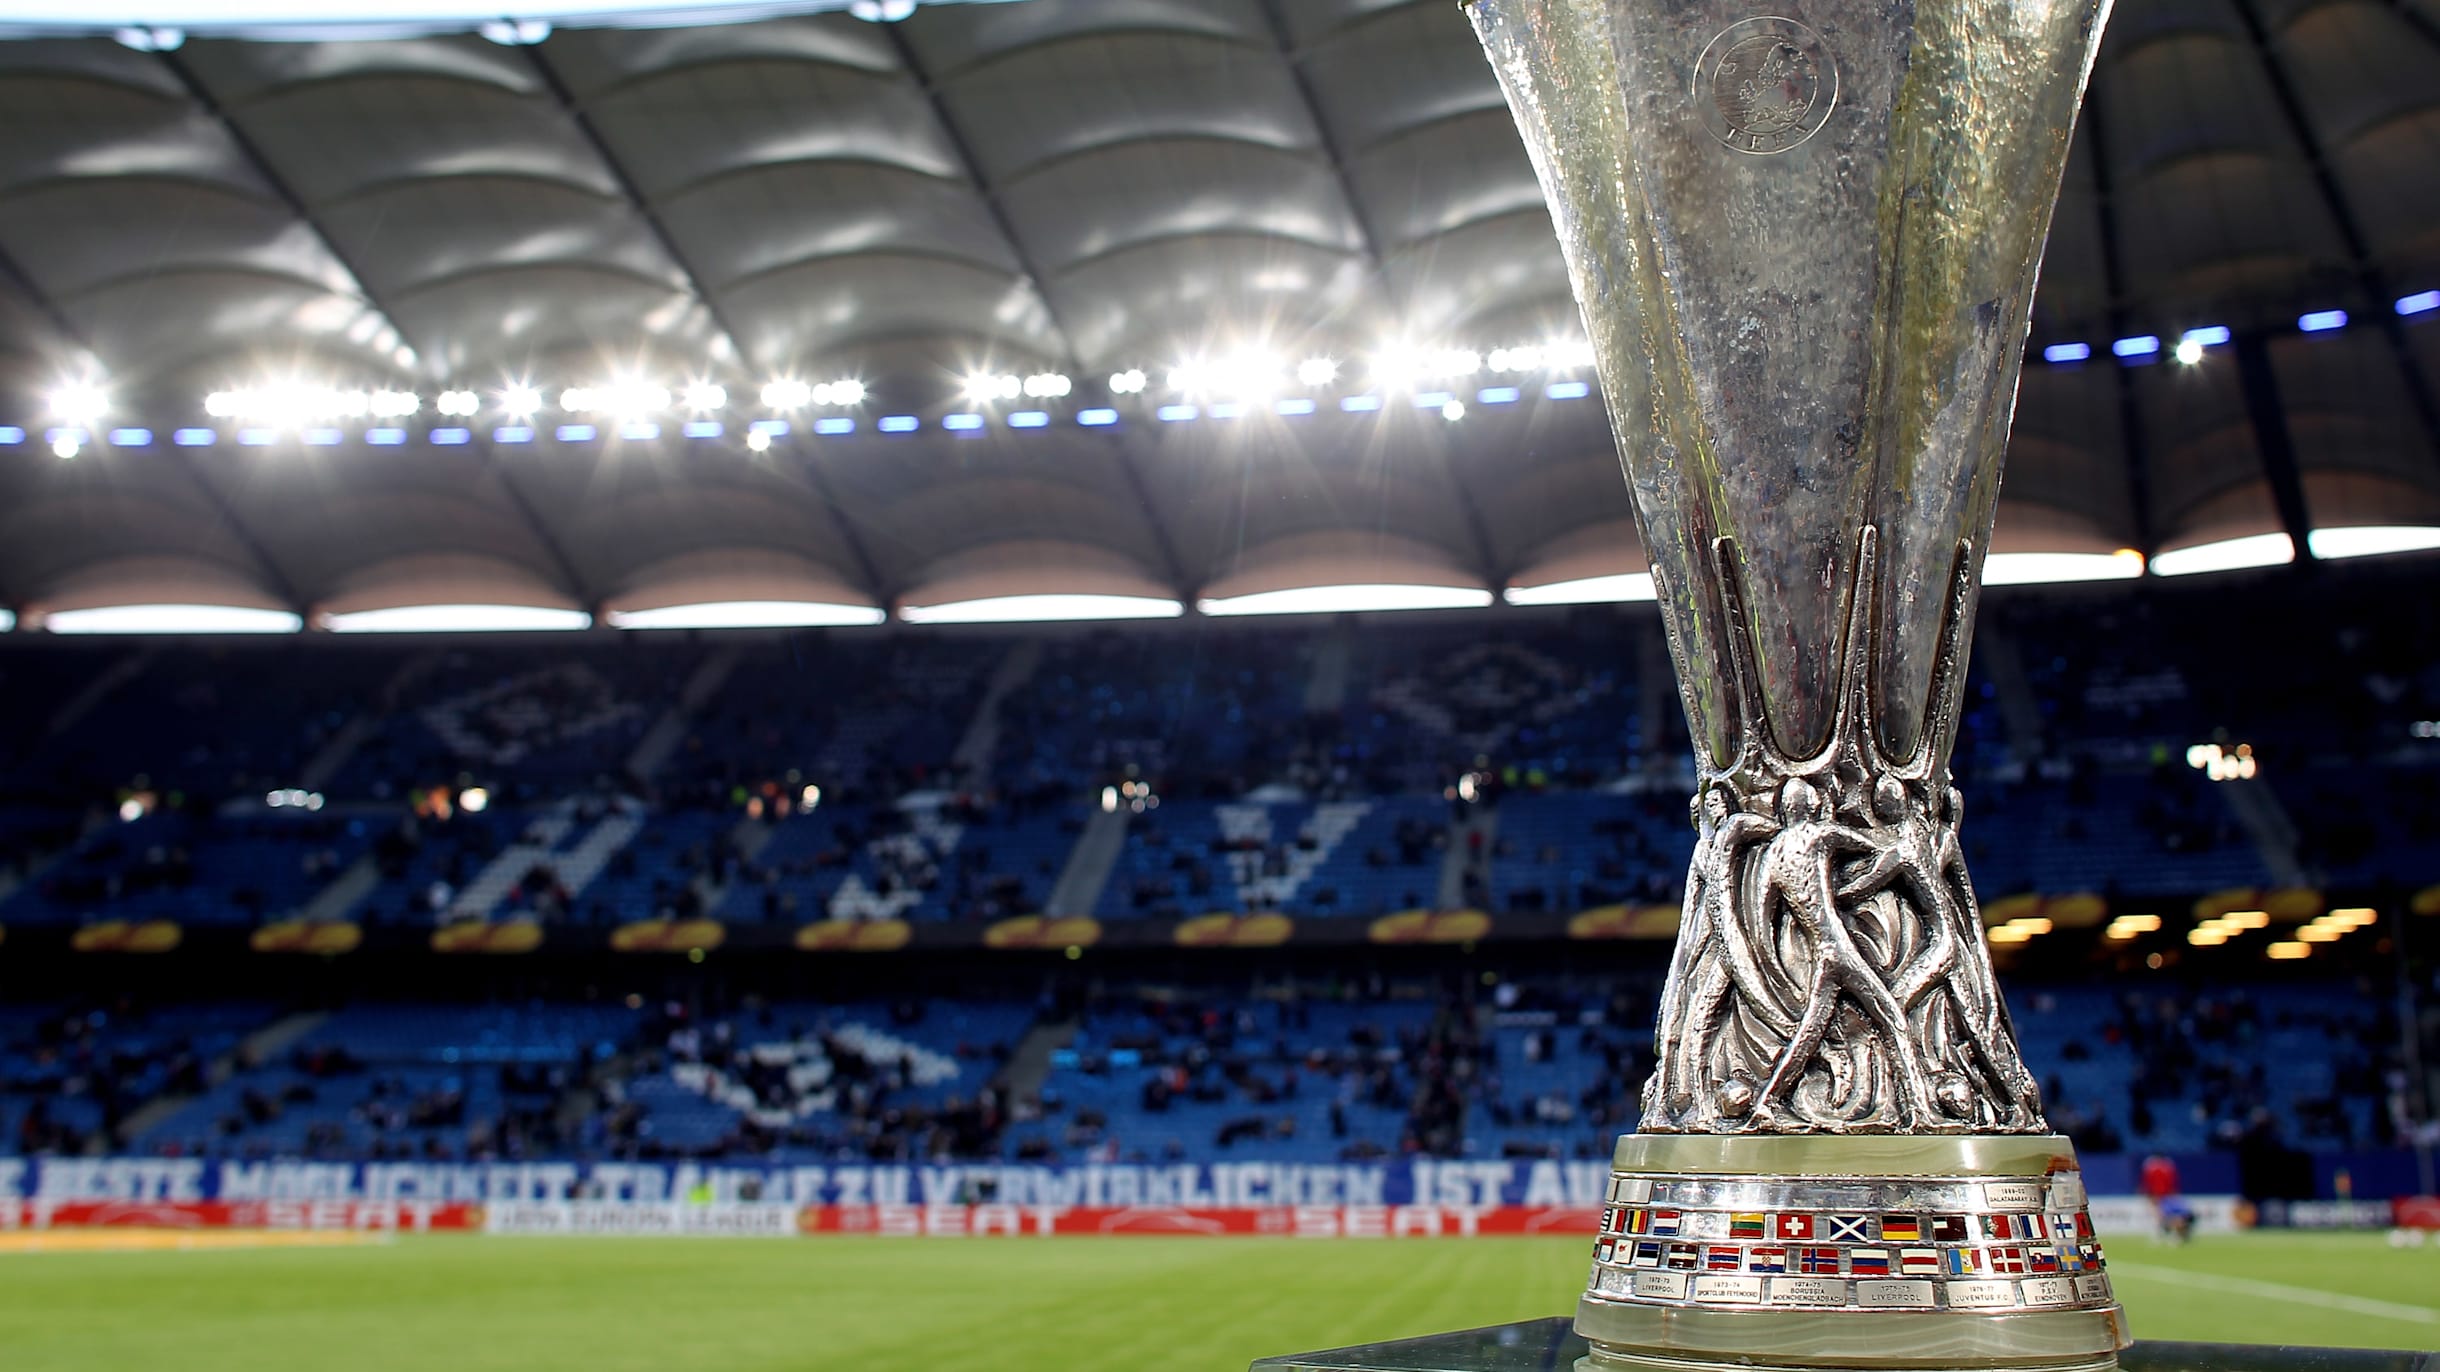 Slavia Prague vs Arsenal in UEFA Europa League quarter-finals, watch live  streaming and telecast in India